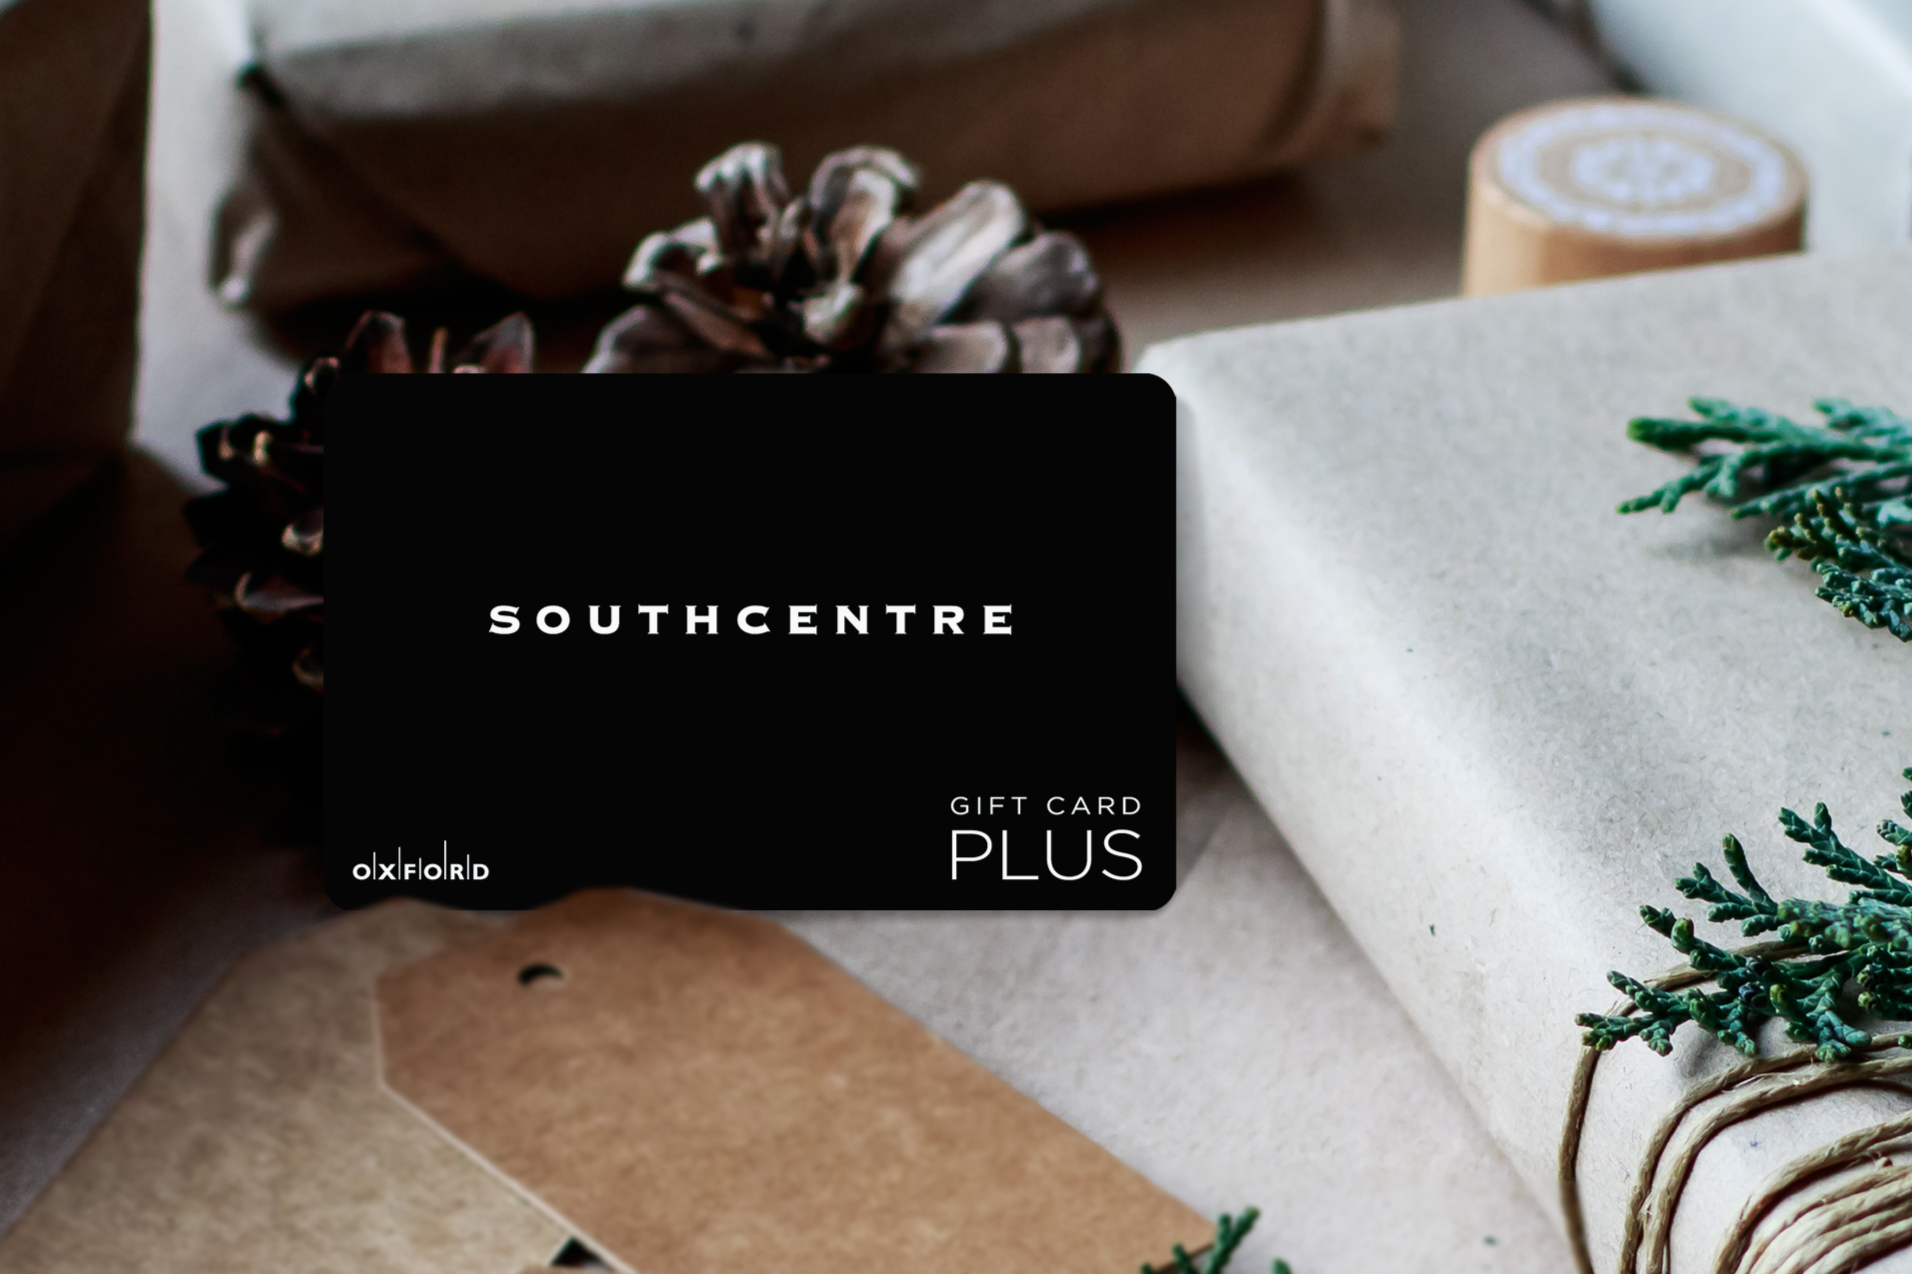 promotional image of a black southcentre gift card surrounded by gift-wrapped books in a holiday setting